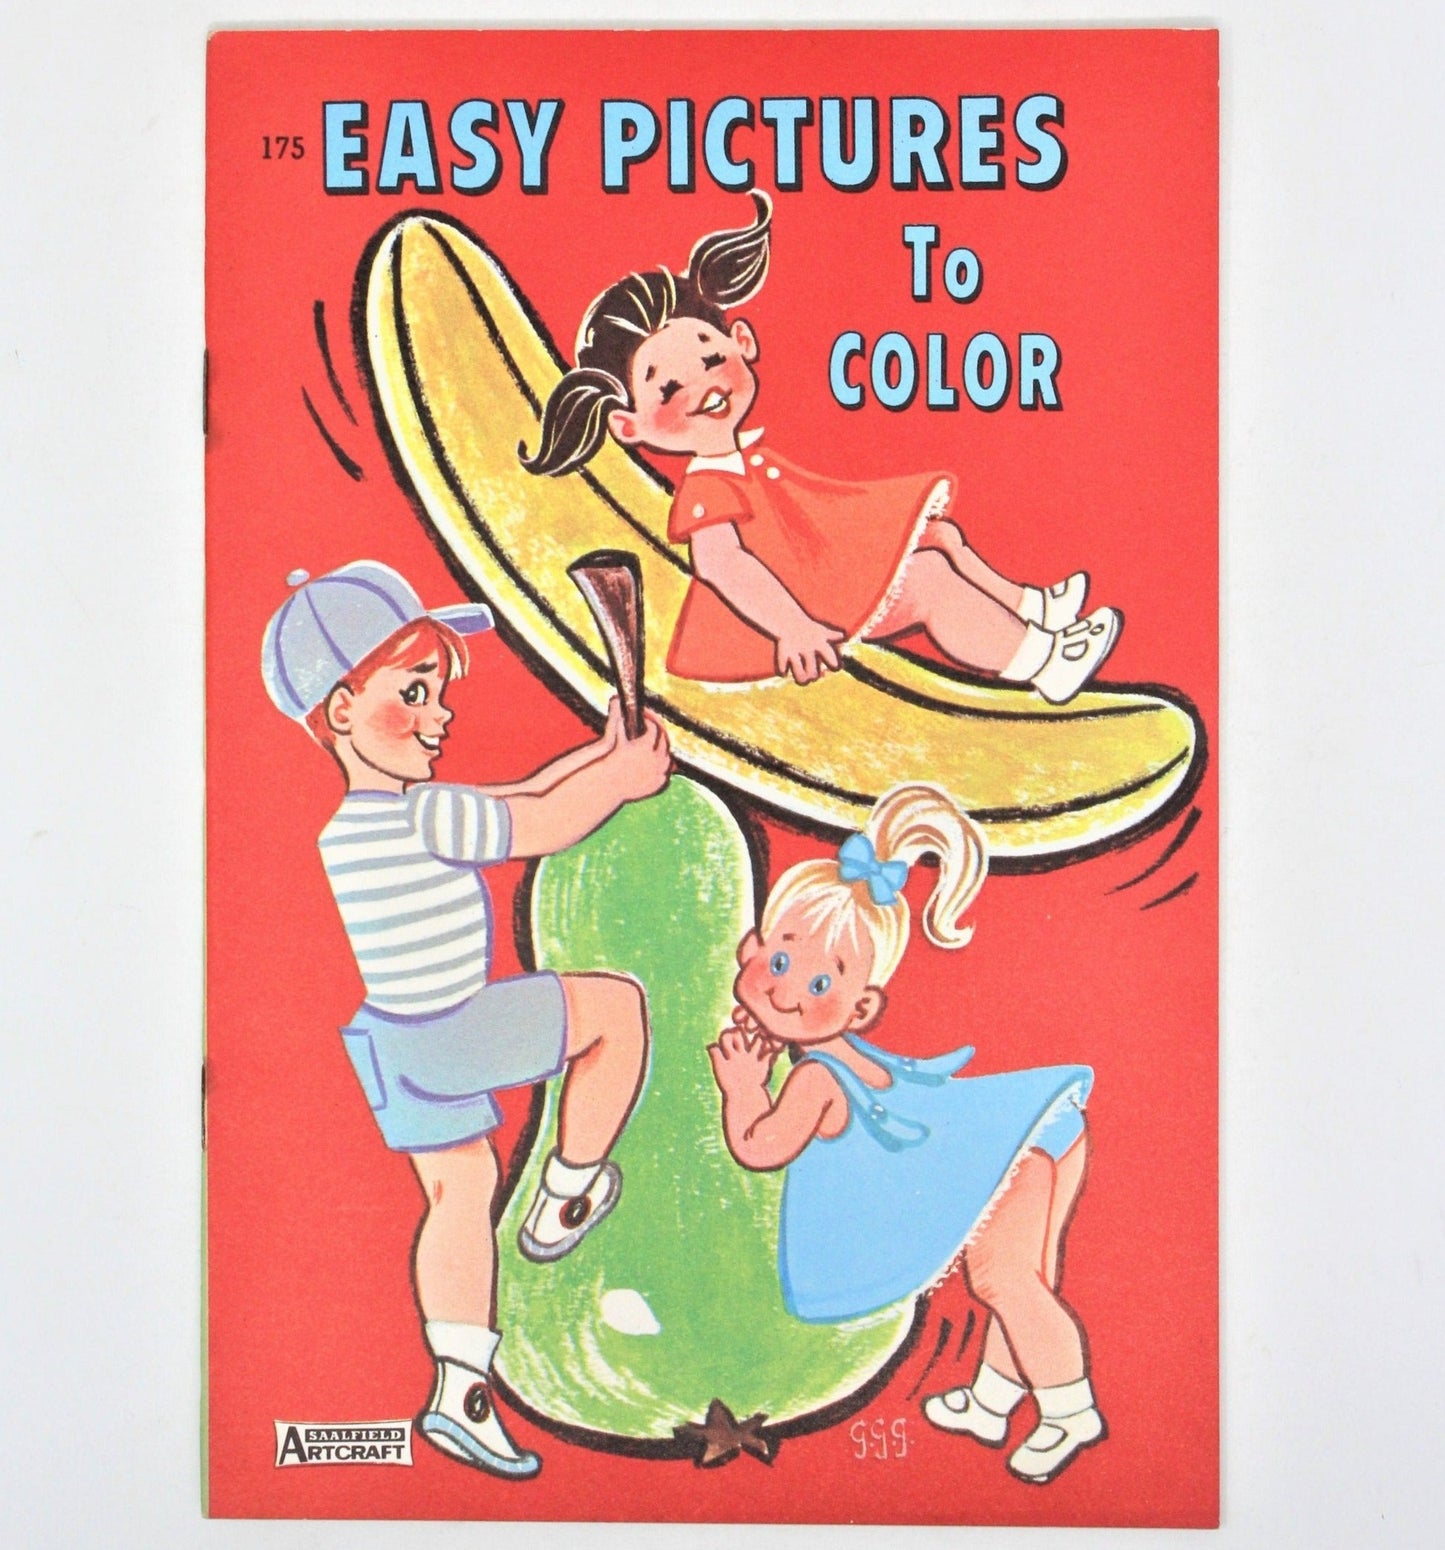 Coloring Book, Big Little Coloring Book, Easy Pictures to Color, NOS, Vintage